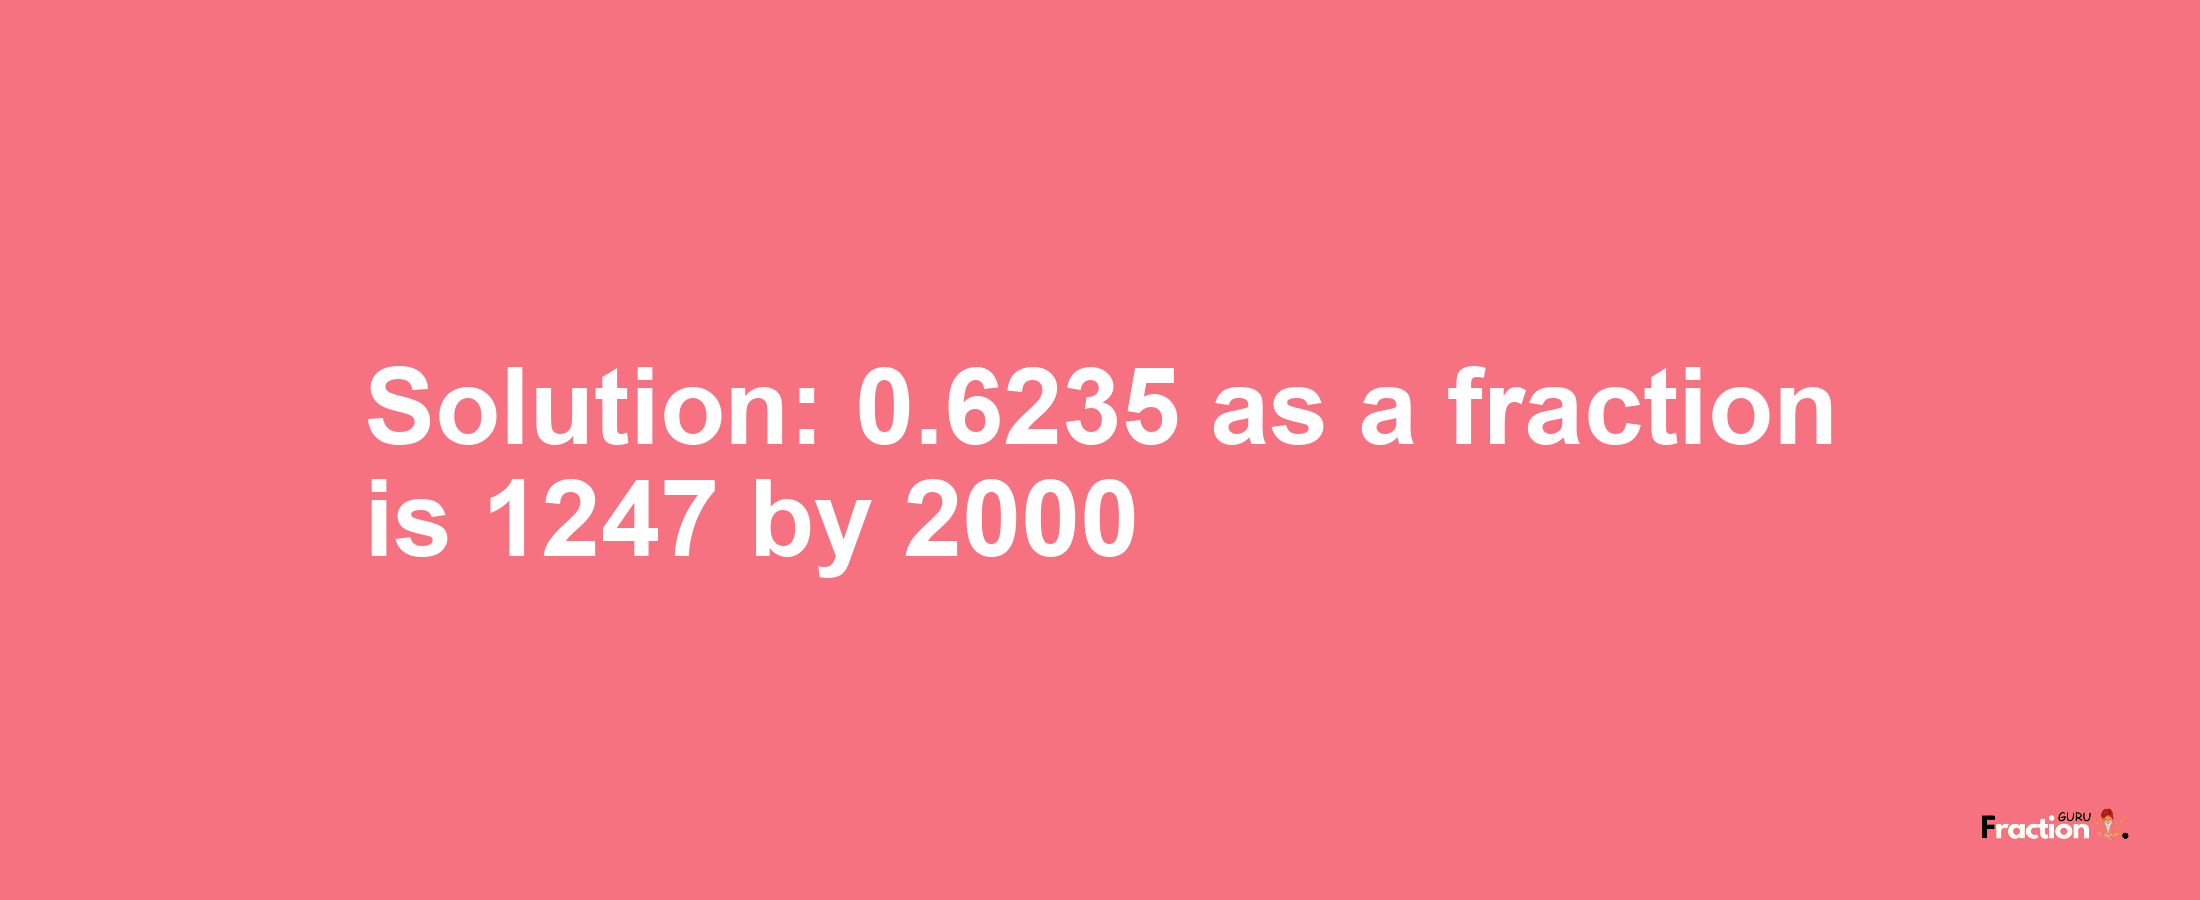 Solution:0.6235 as a fraction is 1247/2000